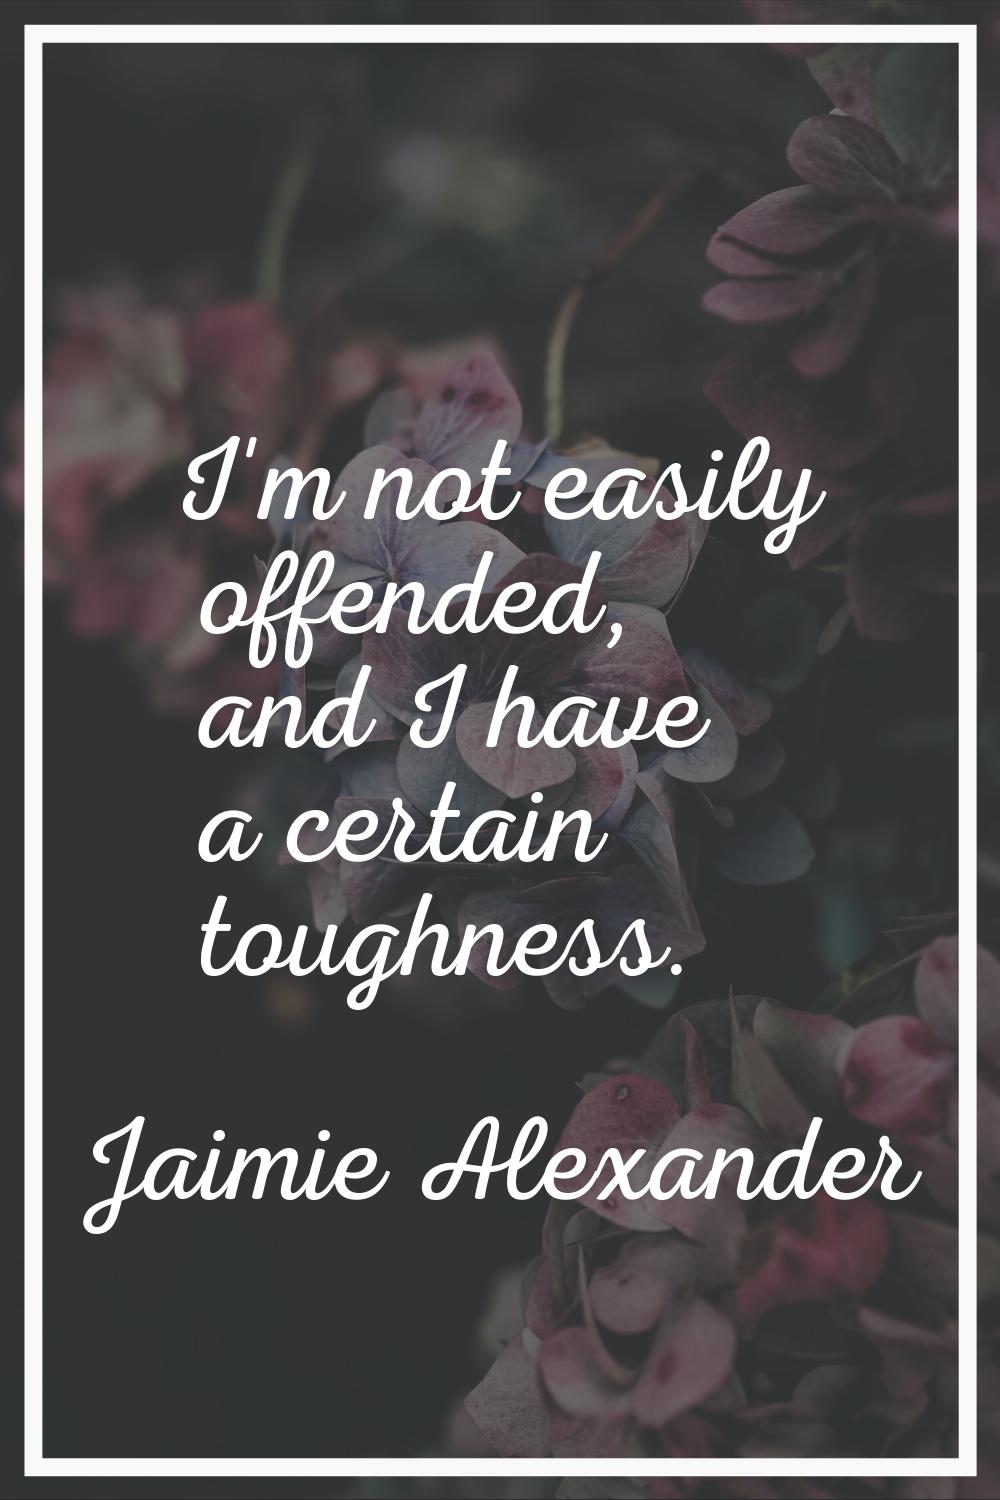 I'm not easily offended, and I have a certain toughness.